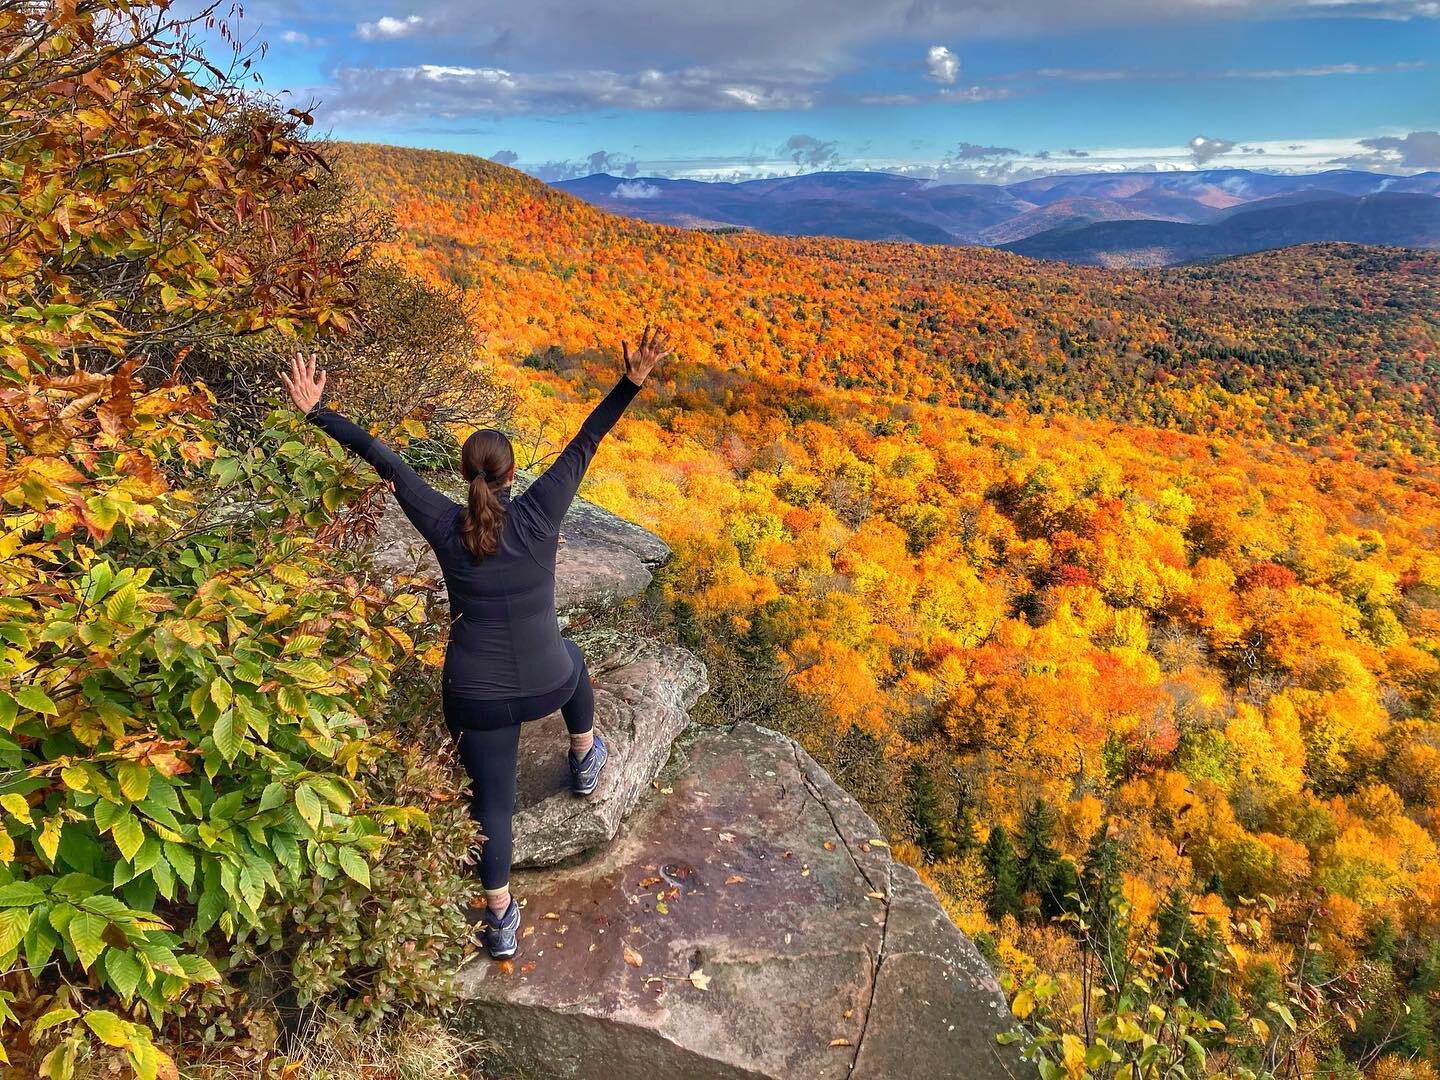 We want your 🍂🍁 pics! Message us with your pic and a quote on why you love peak foliage season for a chance to be featured! #optoutside #hikingapparel #getoutside #hiking #trails #hikes #loveourplanet #hiketheworld #hiketheworldco #fallhikes #leafp